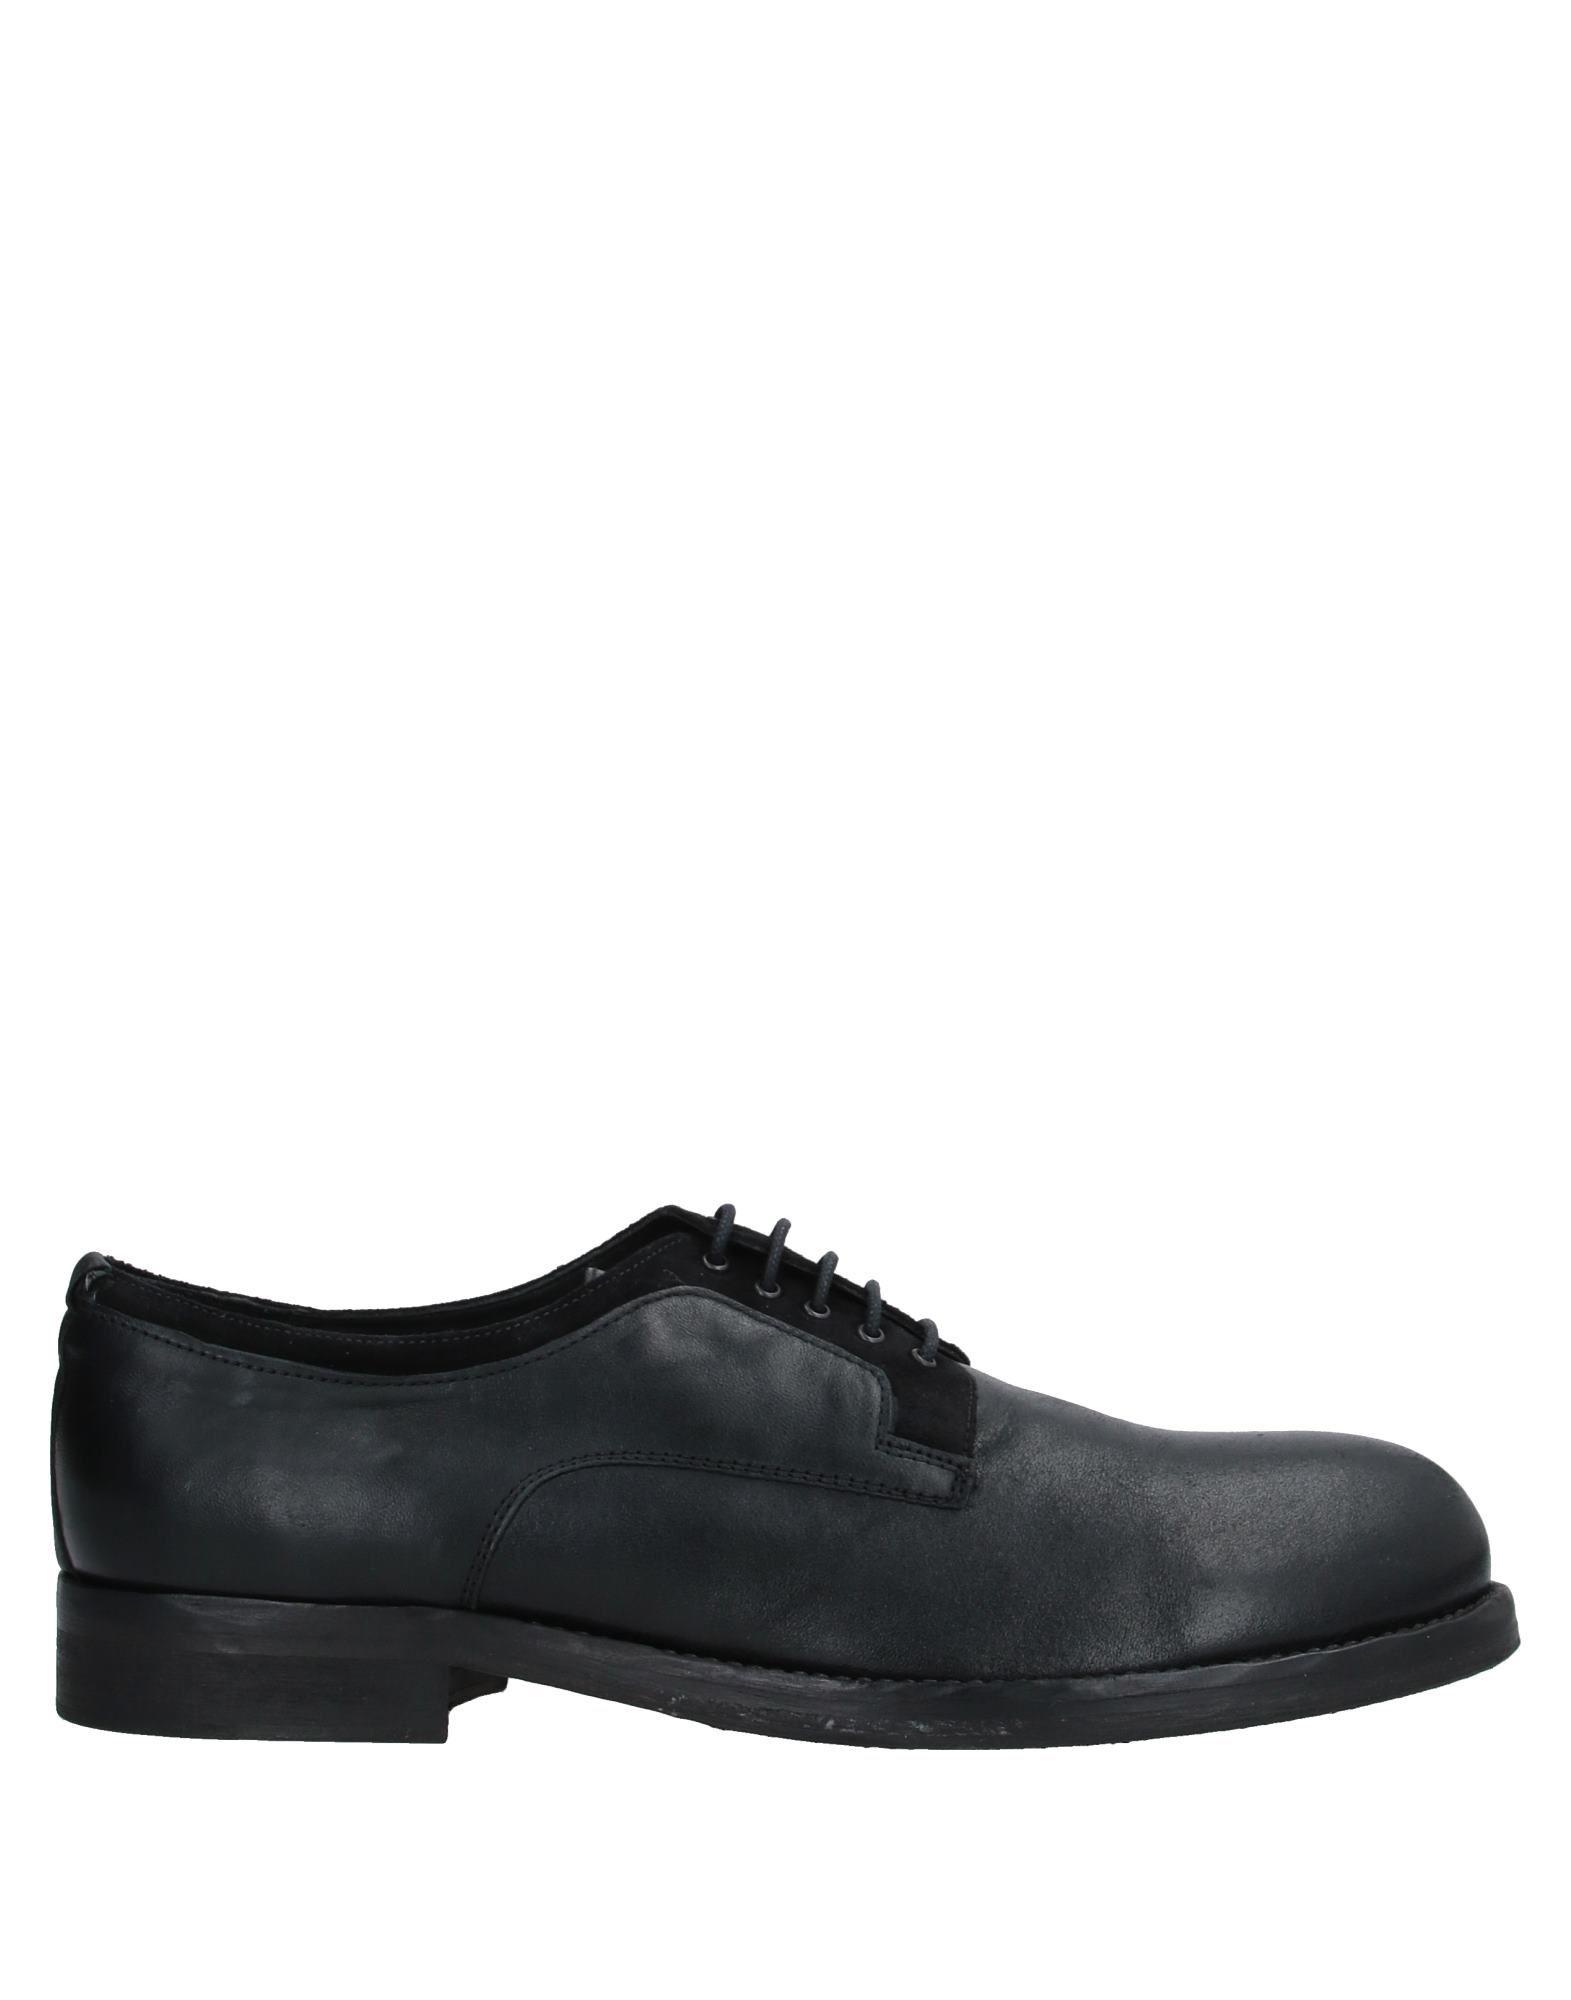 Pawelk's Suede Lace-up Shoe in Black for Men - Lyst